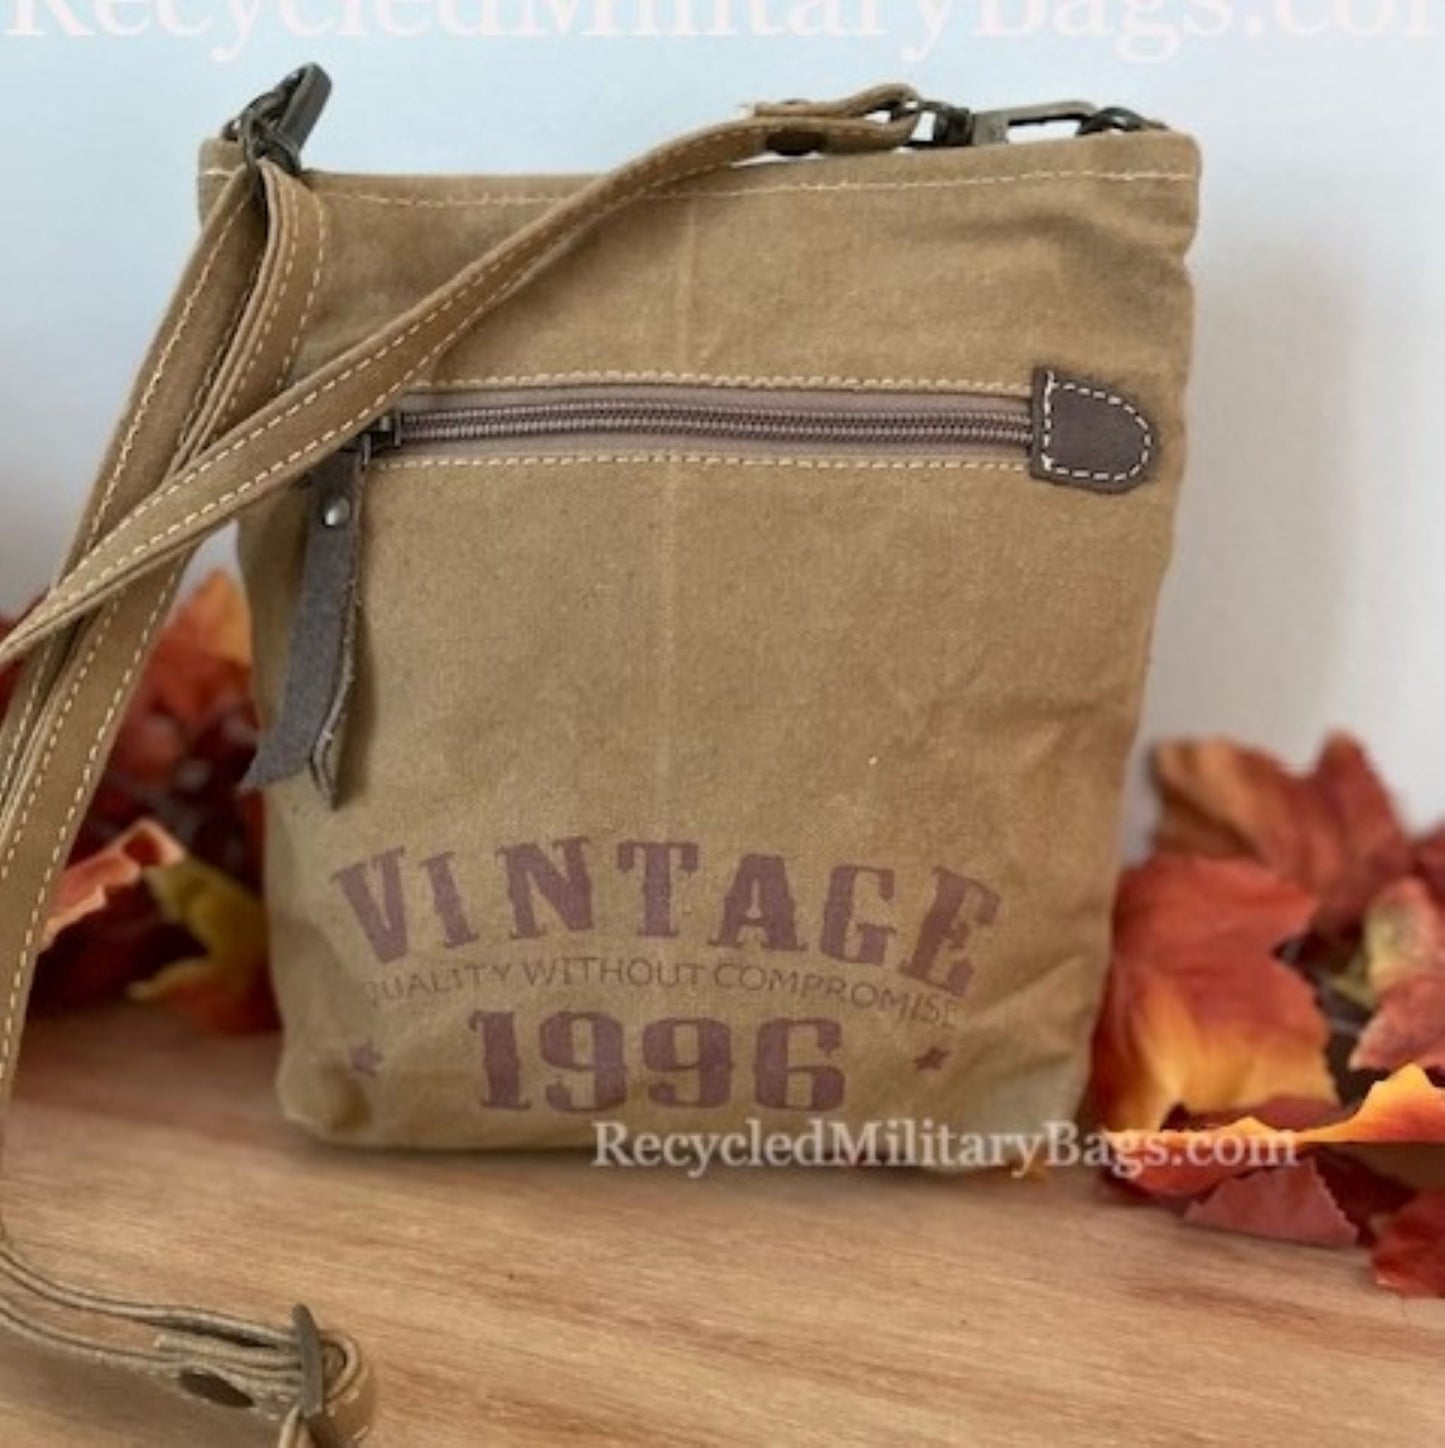 Vintage Hippie Van Small Canvas Bag Crossbody Purse ~ Peace with a Little Sunshine and Flower Power!